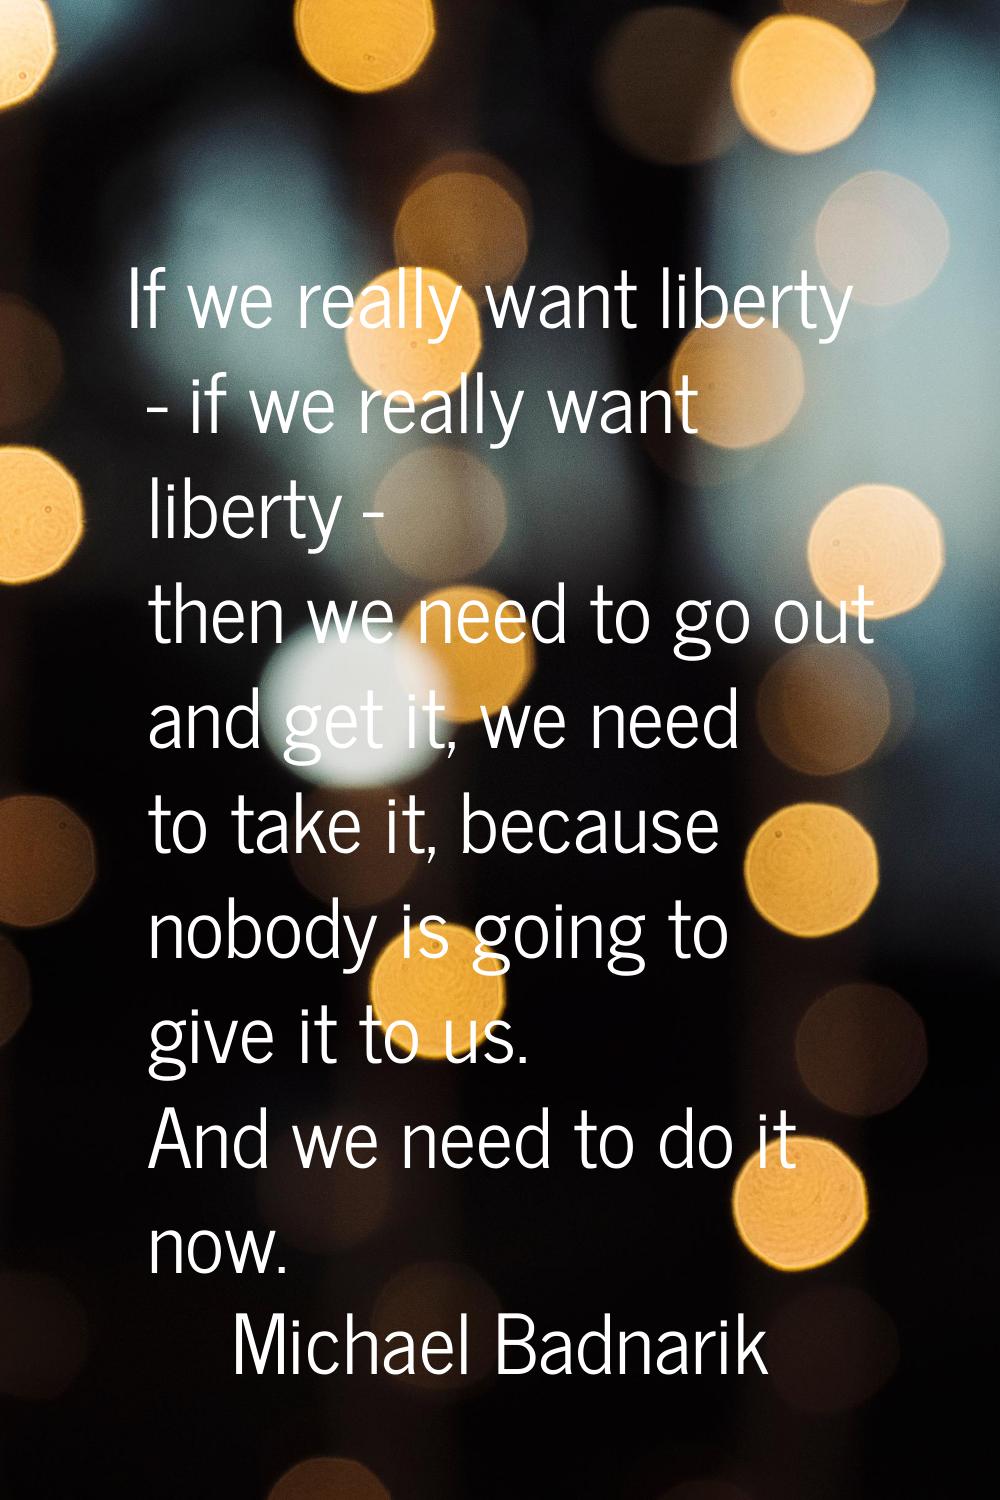 If we really want liberty - if we really want liberty - then we need to go out and get it, we need 